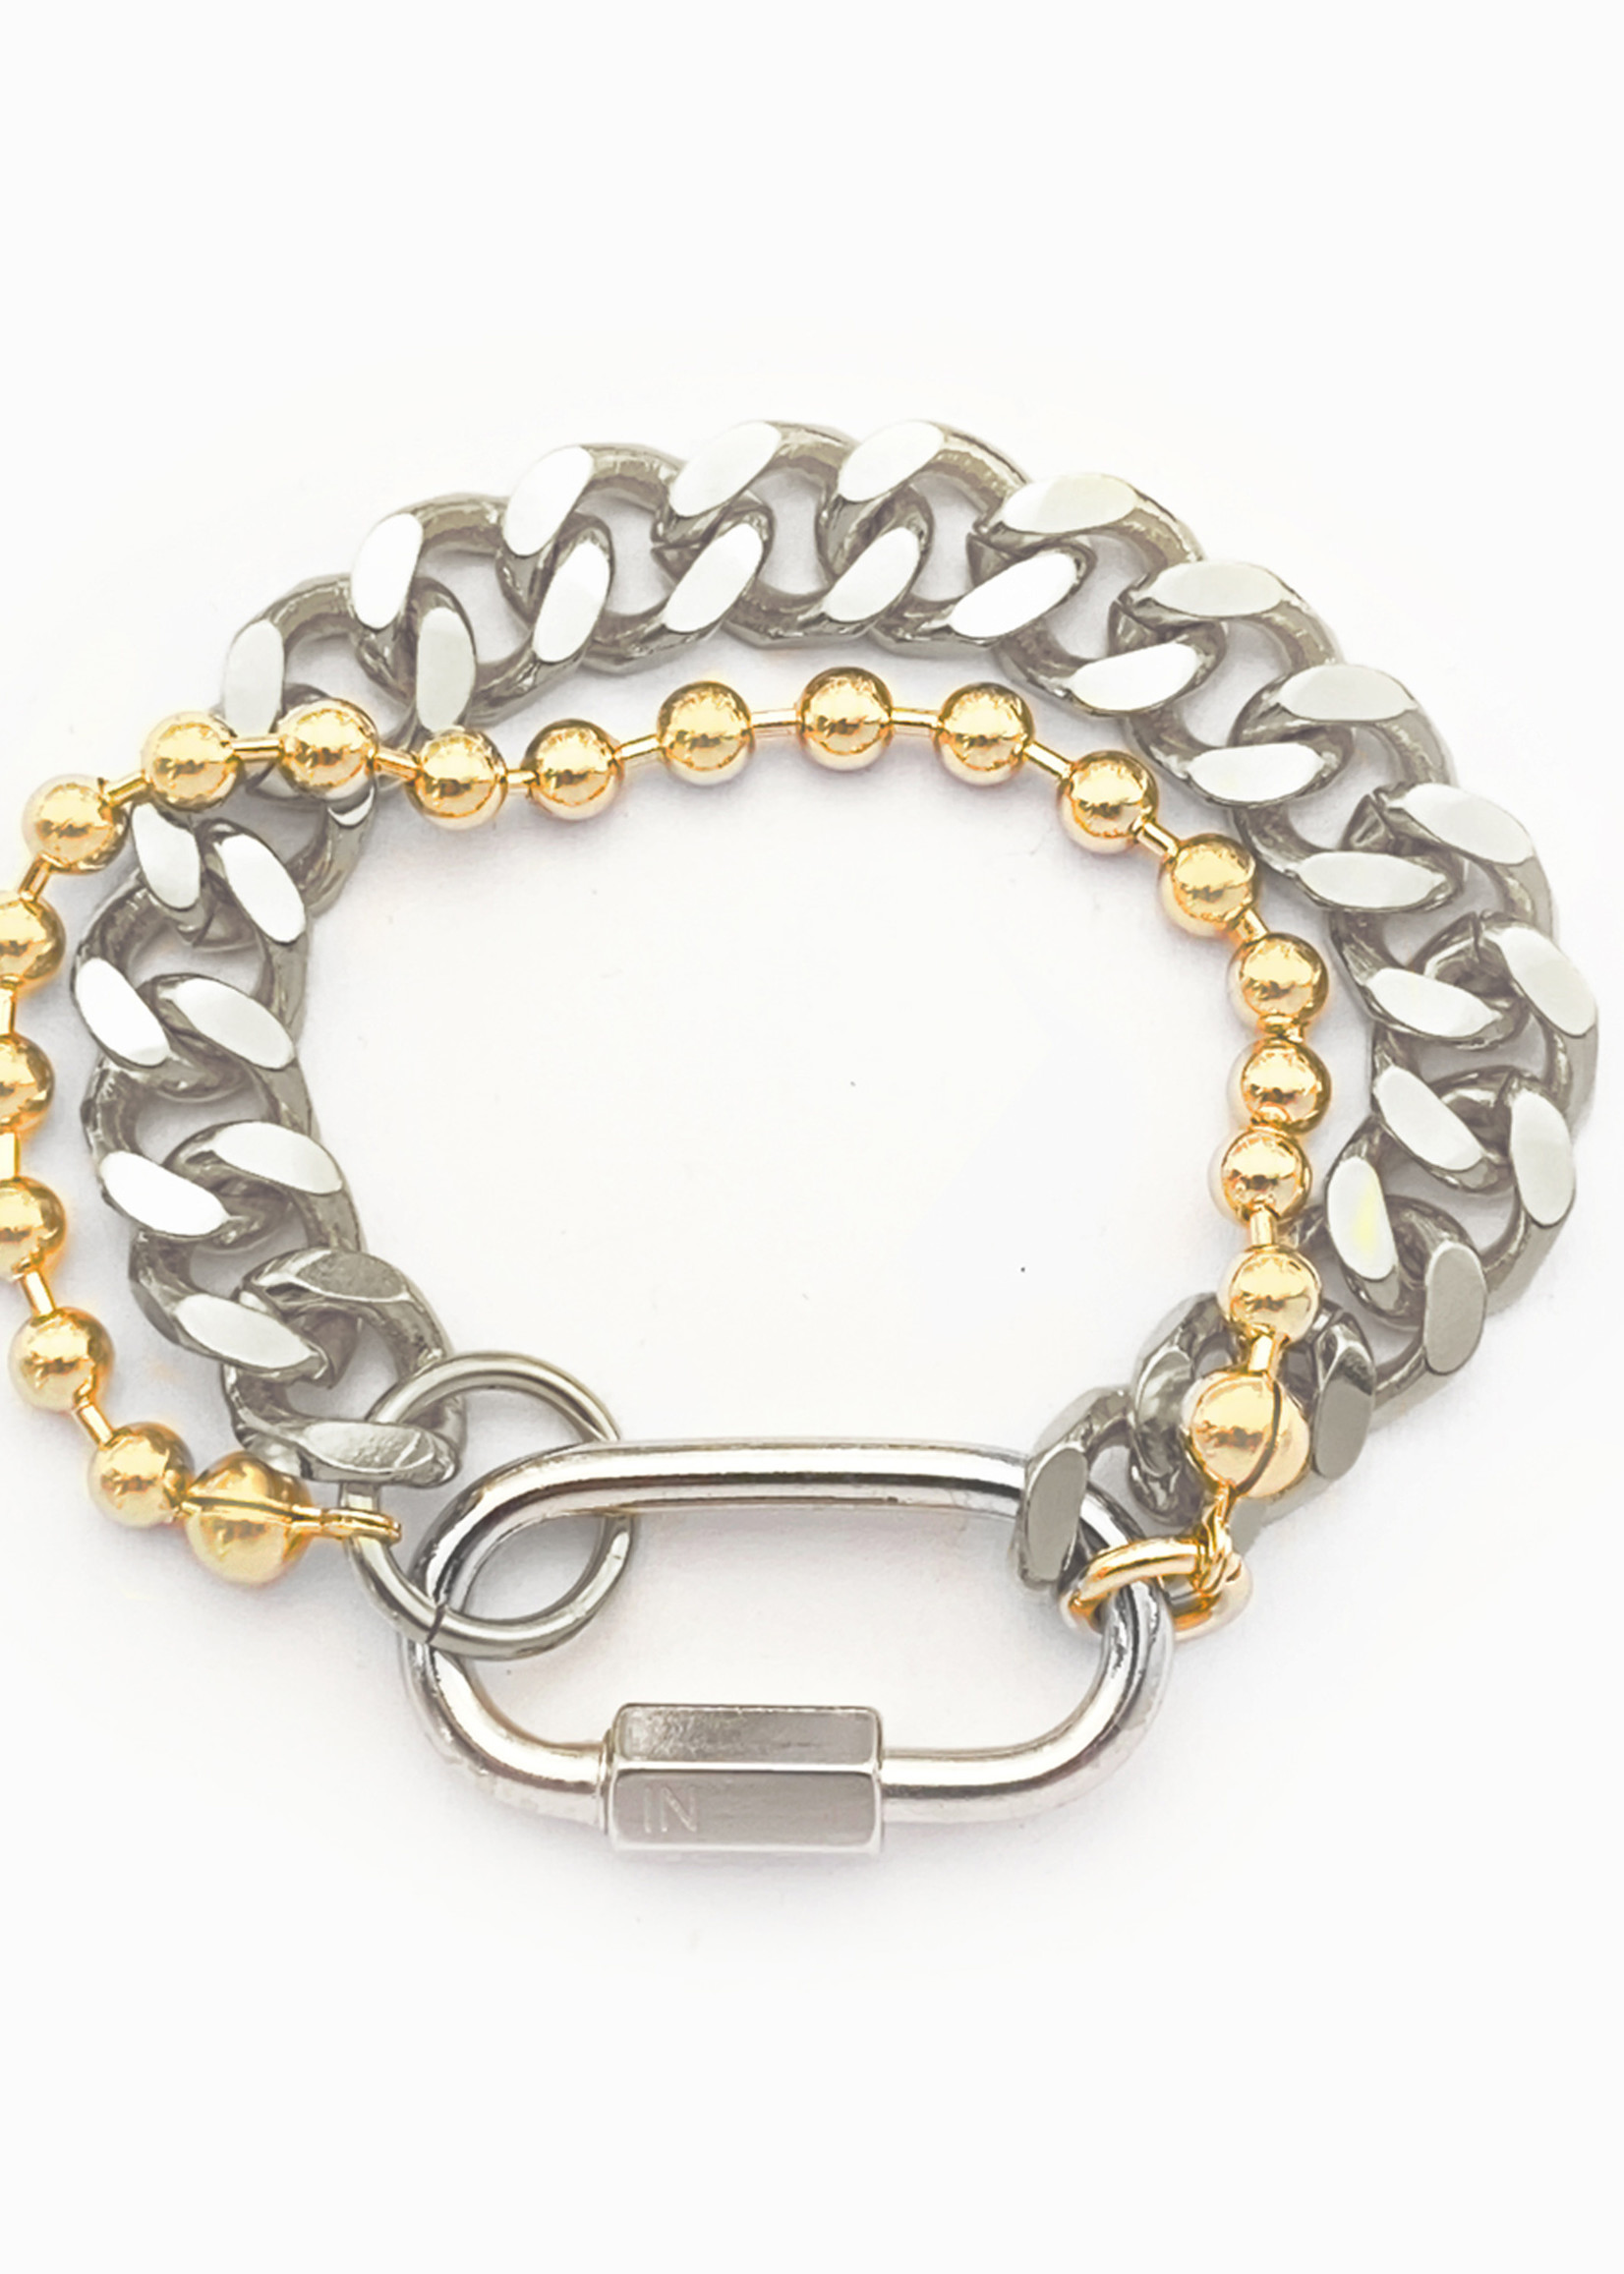 IN GOLD WE TRUST PARIS Large Cuban Link with Gold Ball Chain Bracelet